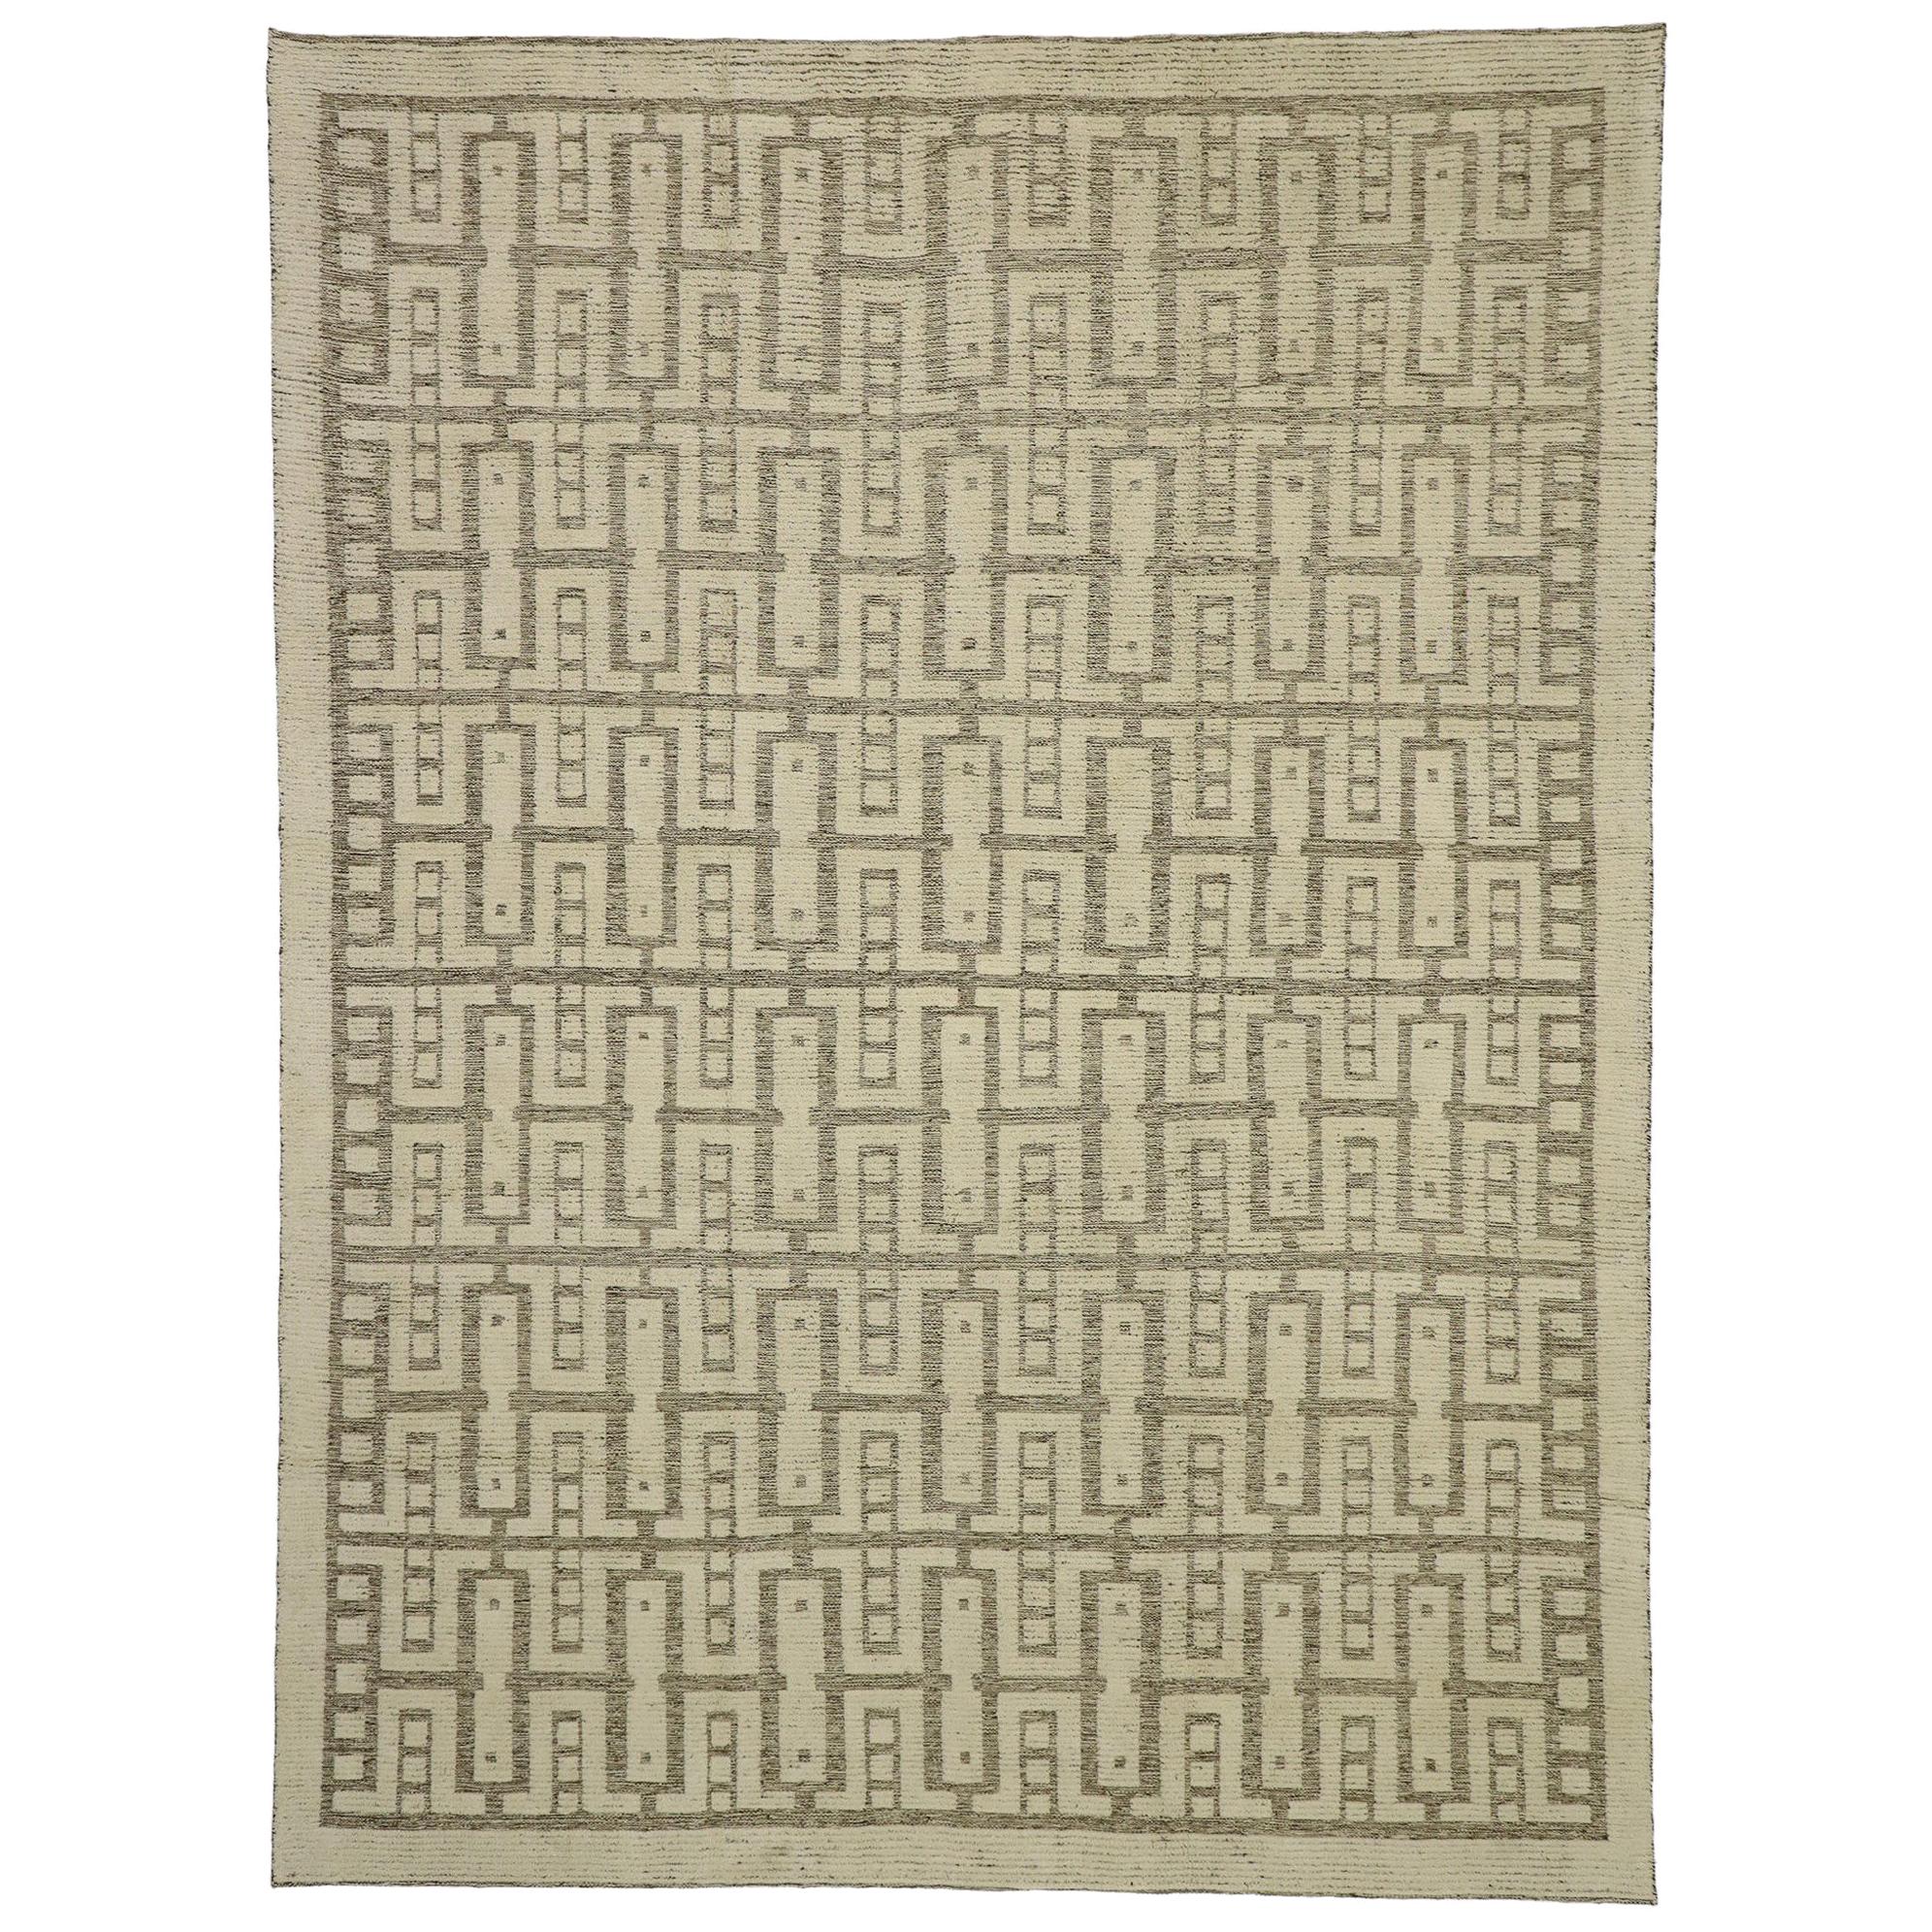 New Contemporary High-Low Geometric Rug with Transitional and Art Deco Style